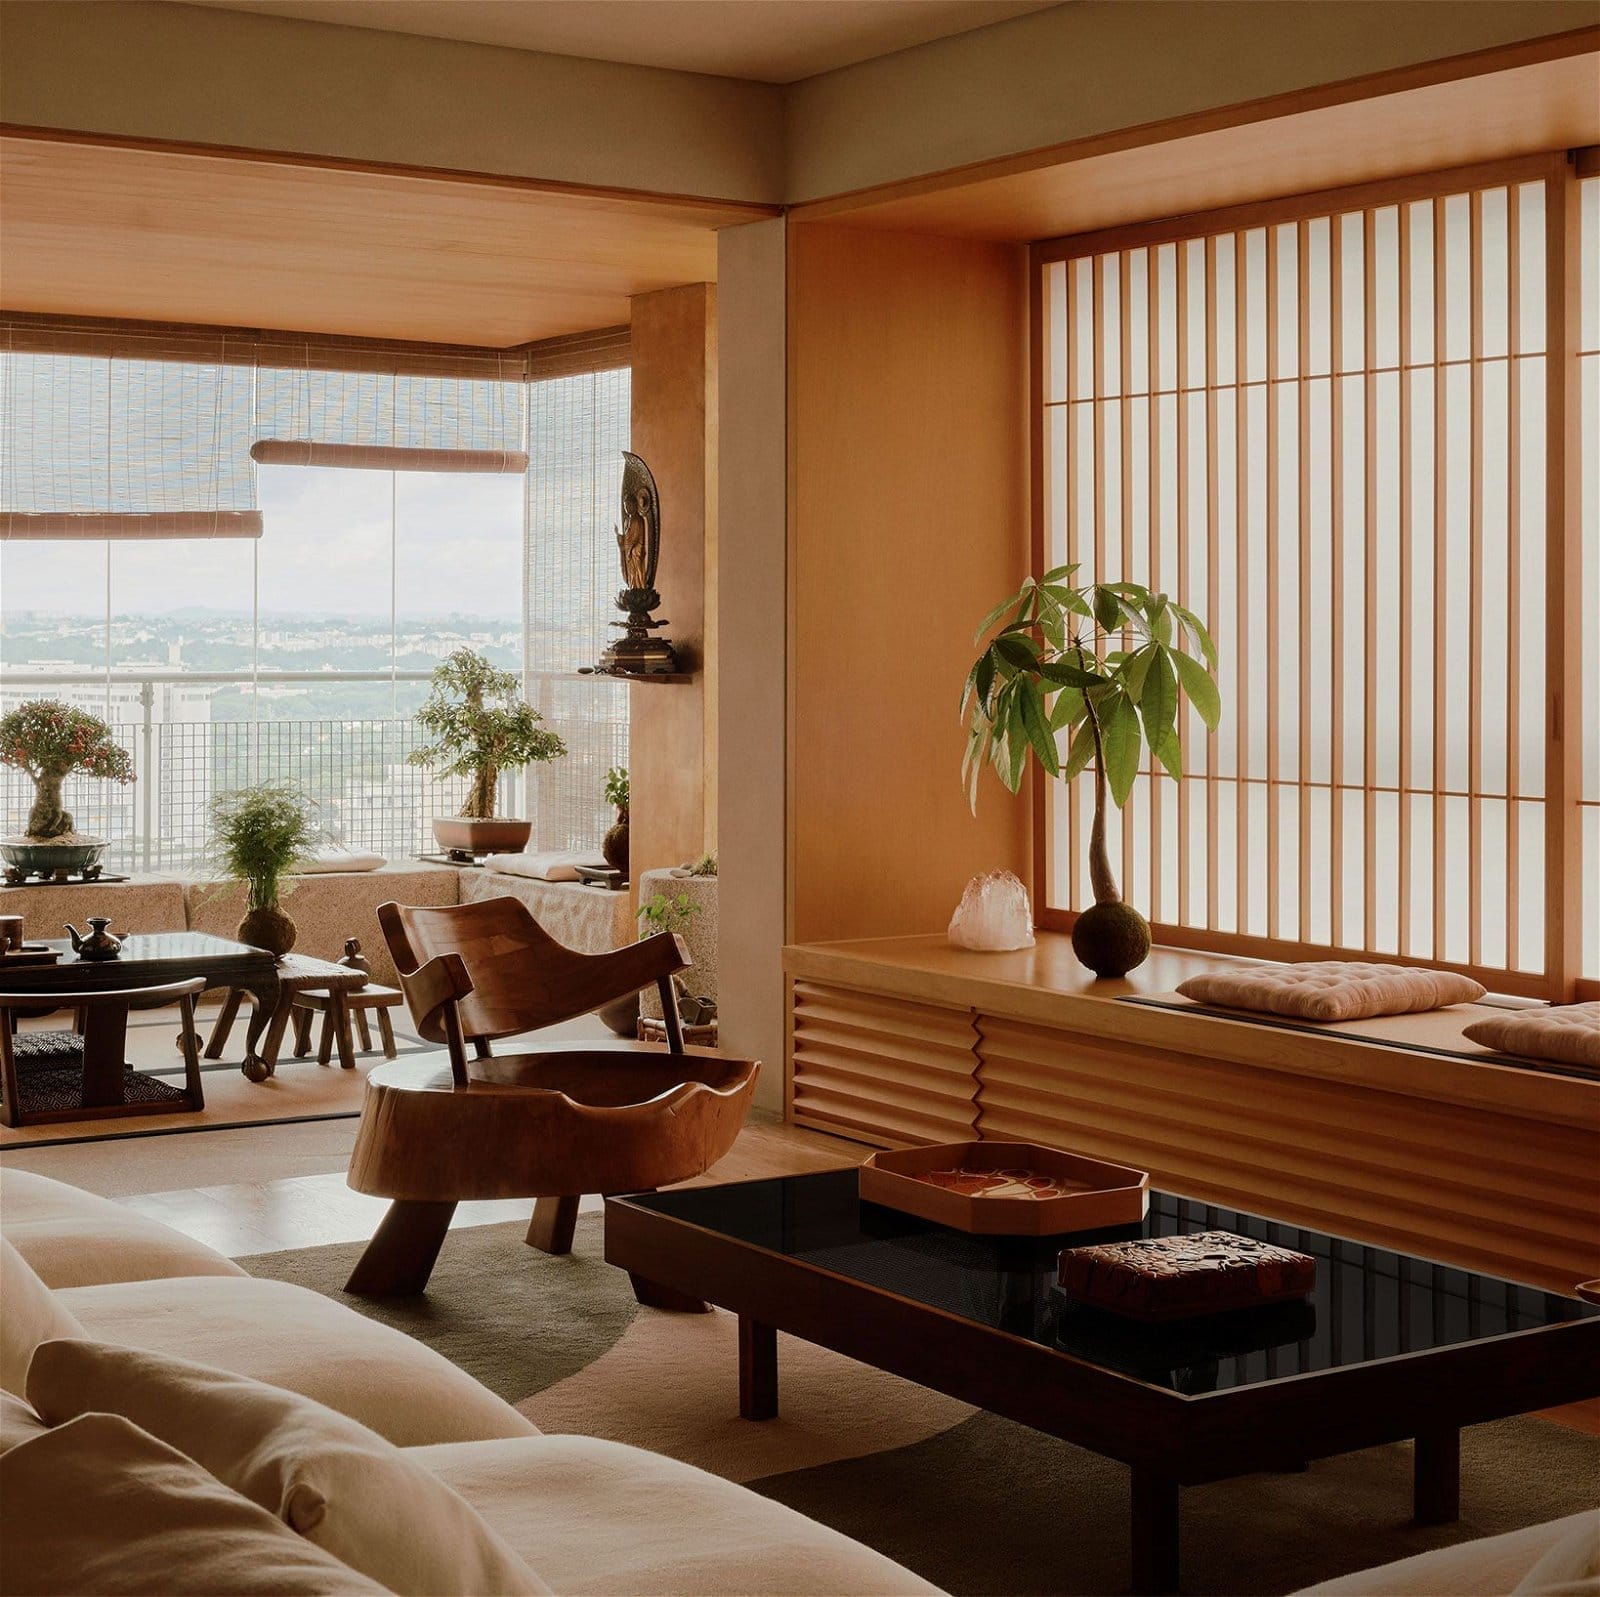 Don’t Let the Japanese Aesthetic Fool You—This Serene Home Is Actually in Brazil